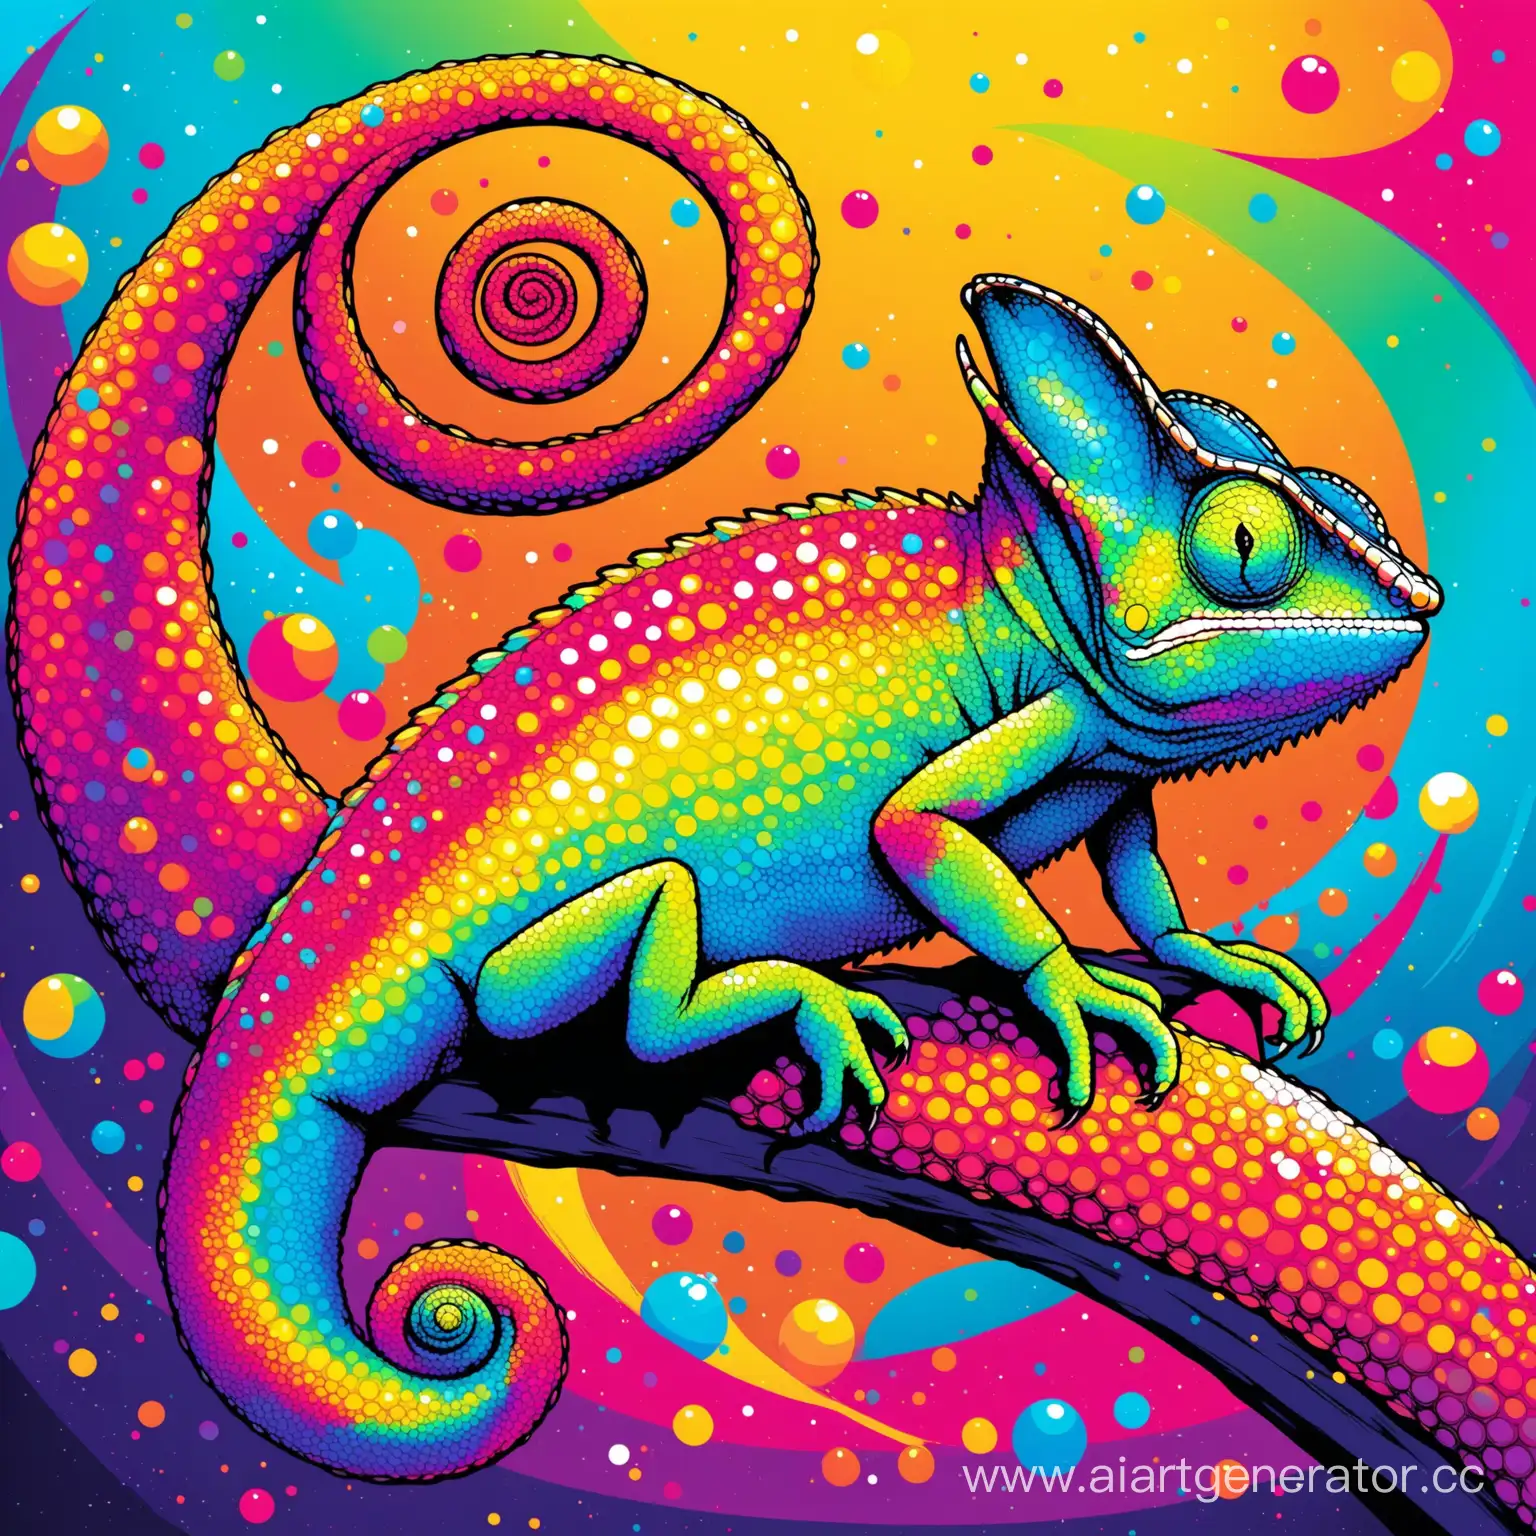 Colorful-Chameleon-Art-Vibrant-Volume-and-Contrast